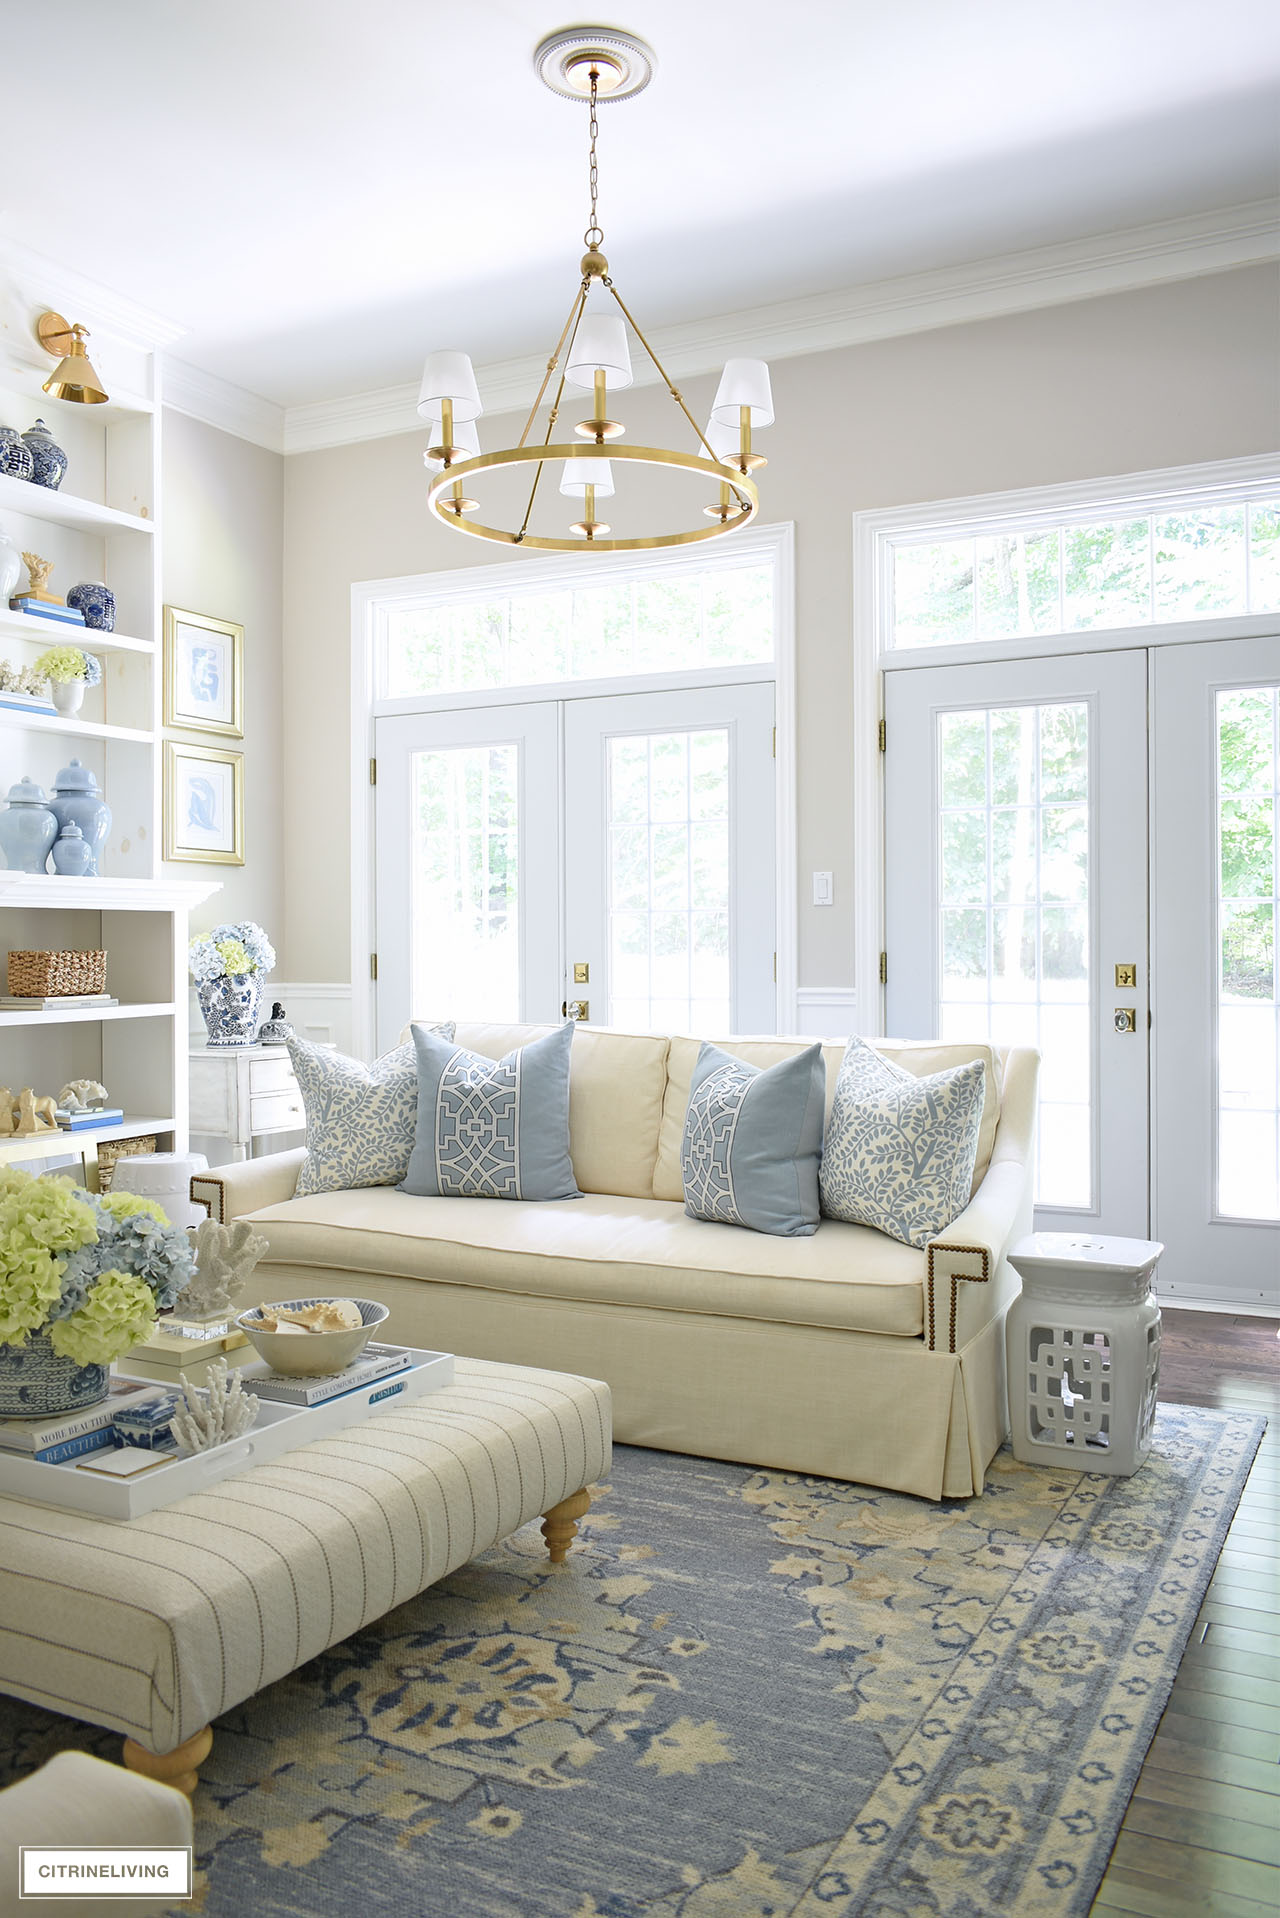 Living room decorated for summer with a soft blue and white color palette, natural accents and coastal touches.